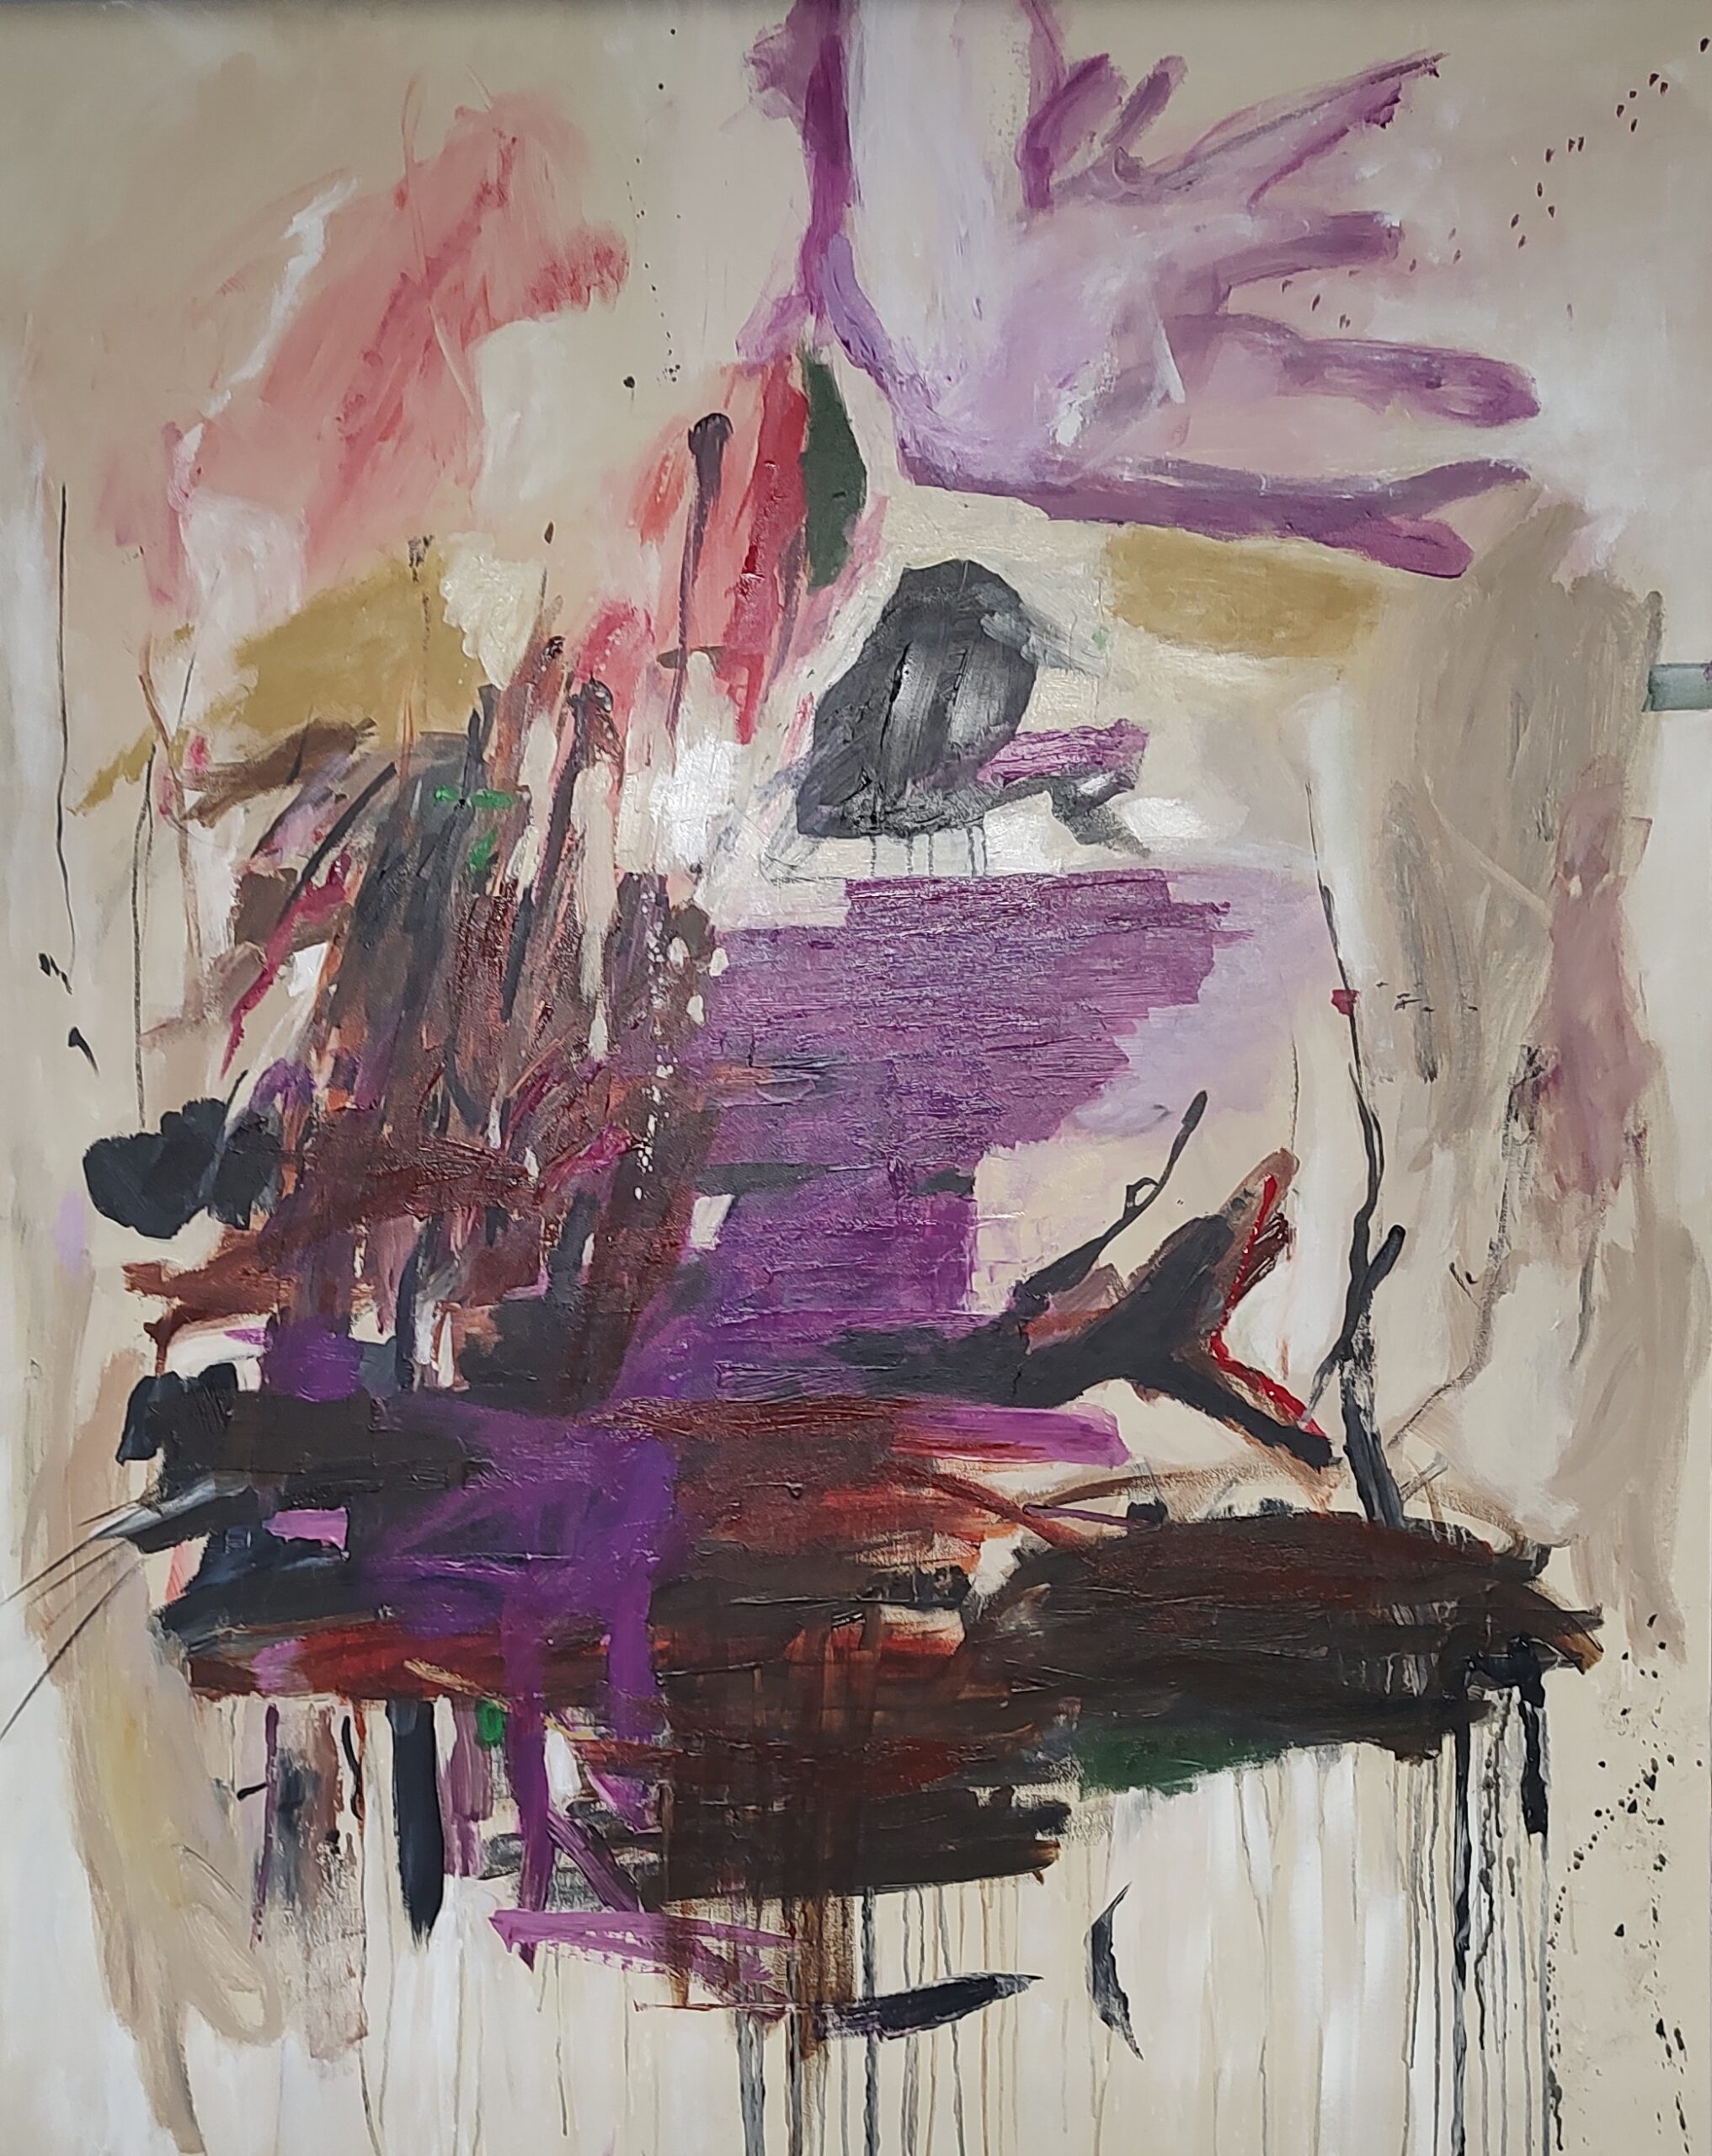 "ODE TO JOAN - UNTITLED 1958"